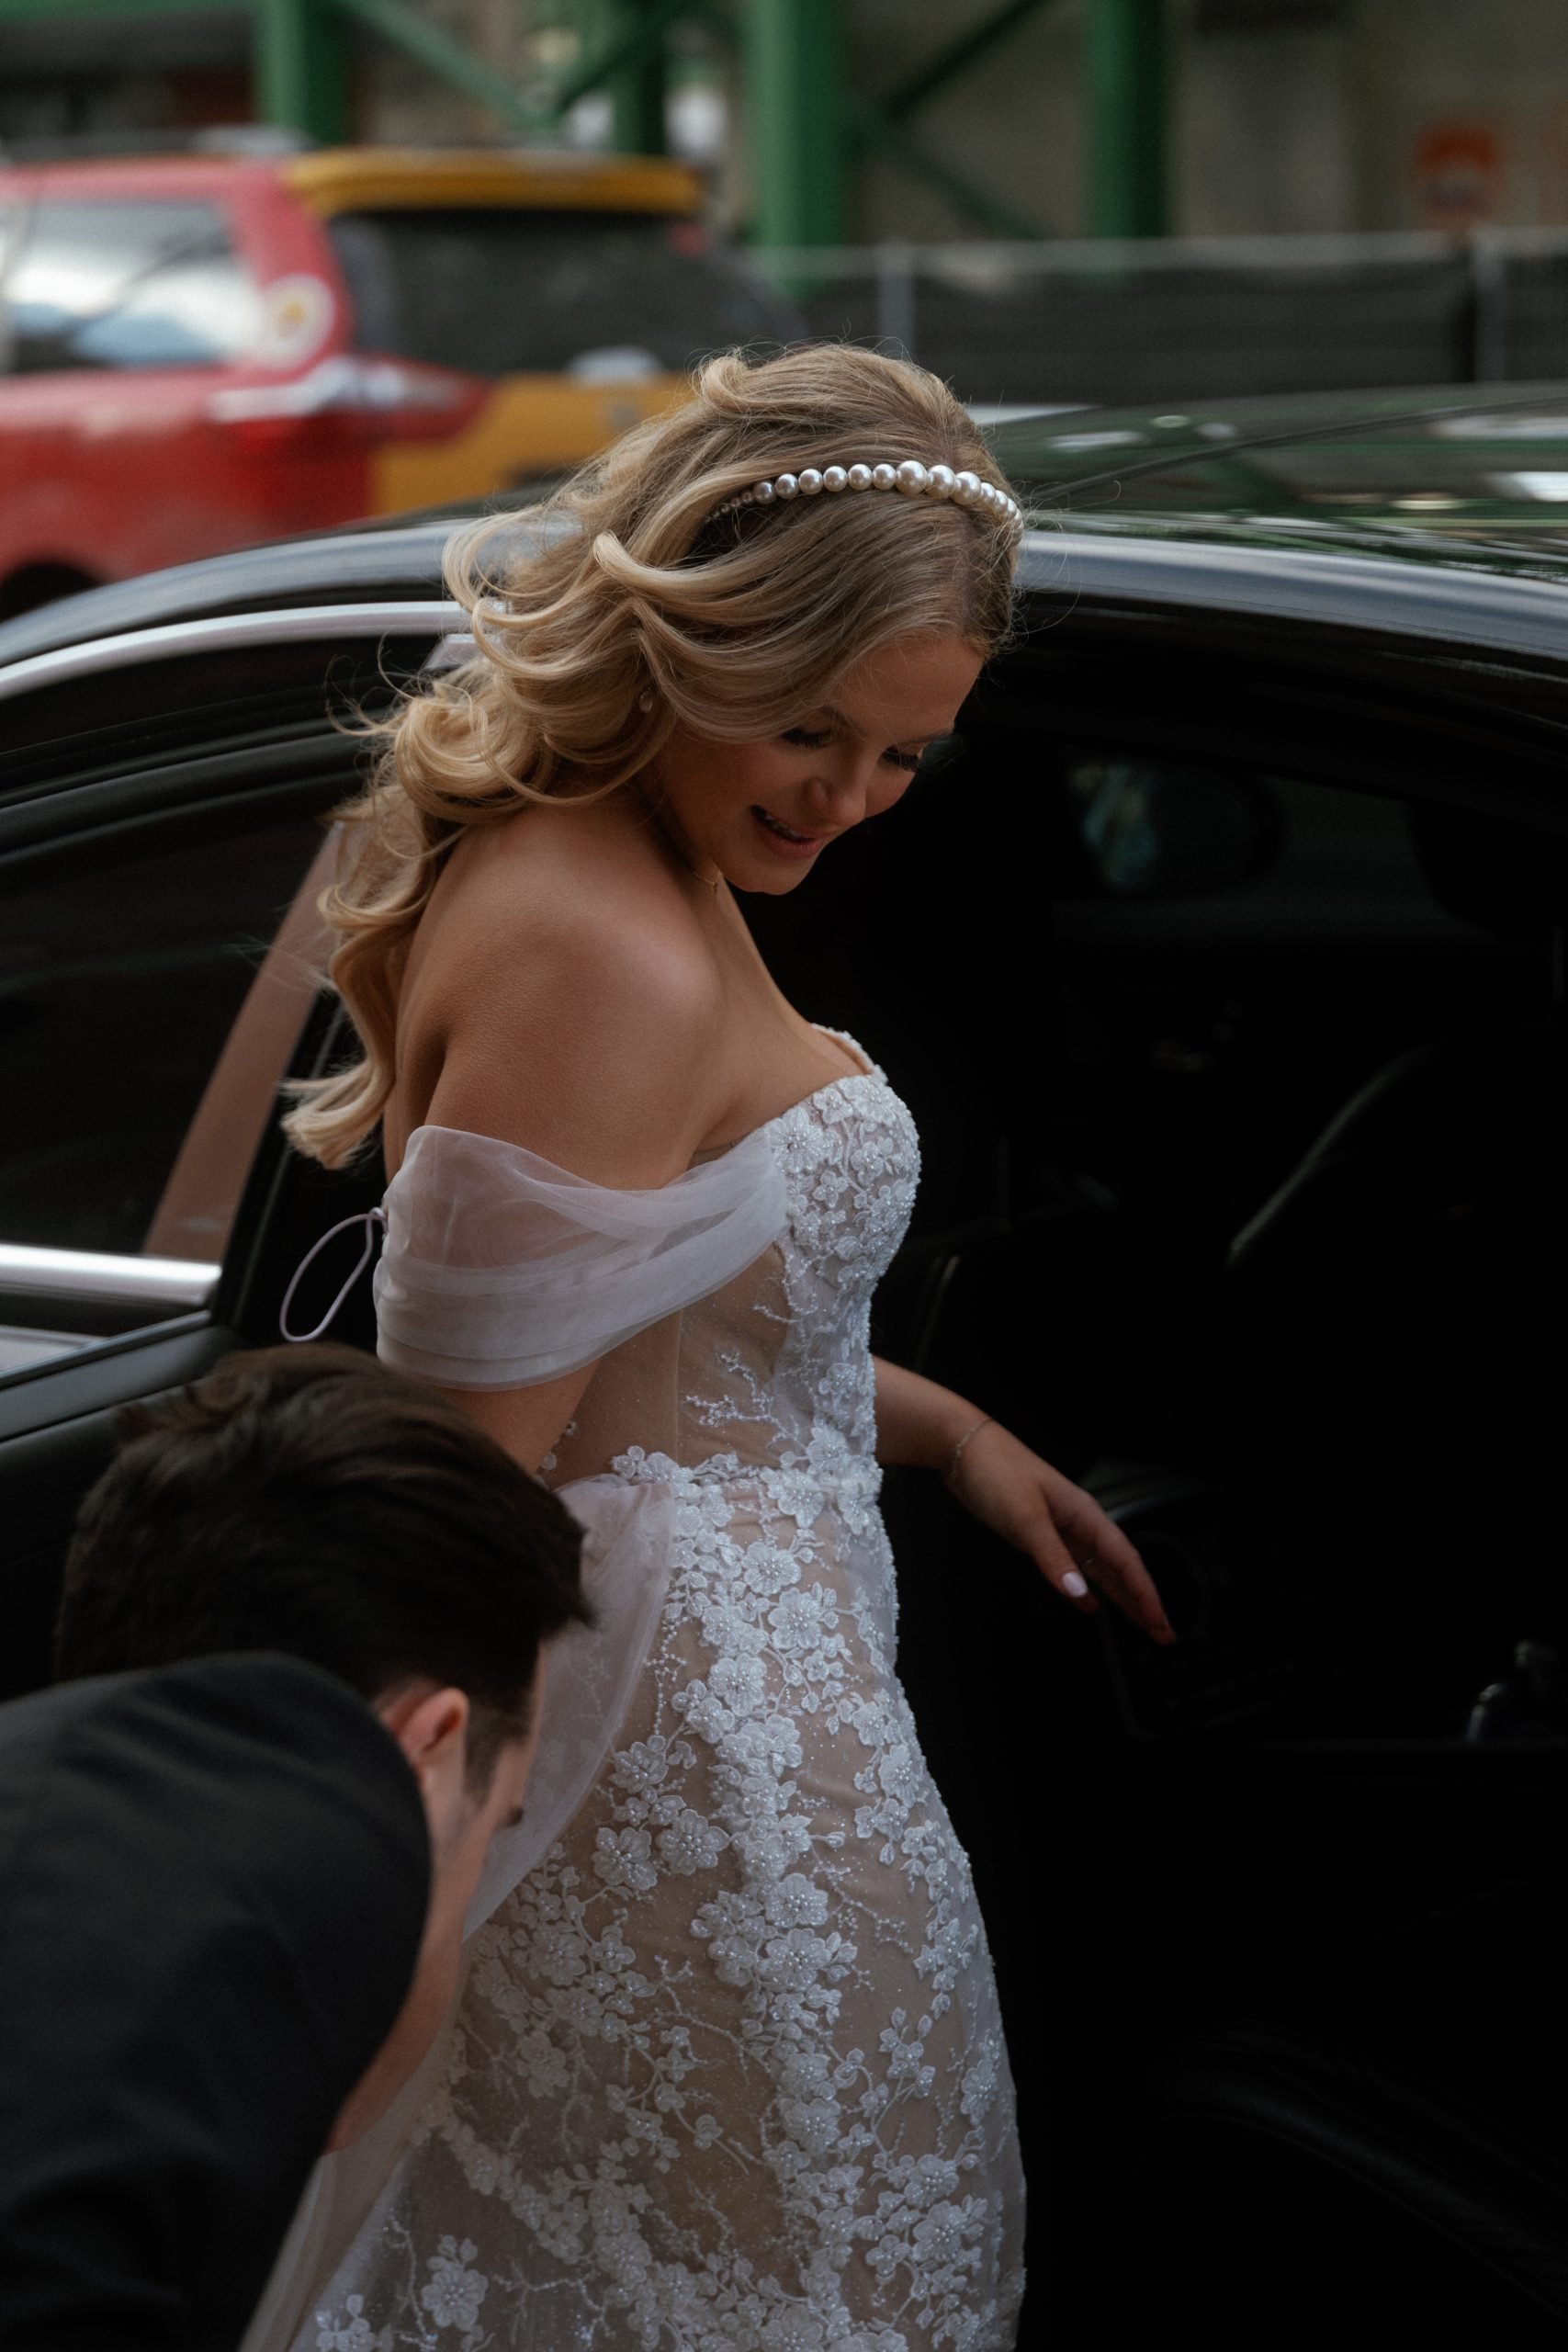 bride gets ready to enter vintage car on the way to the wedding reception